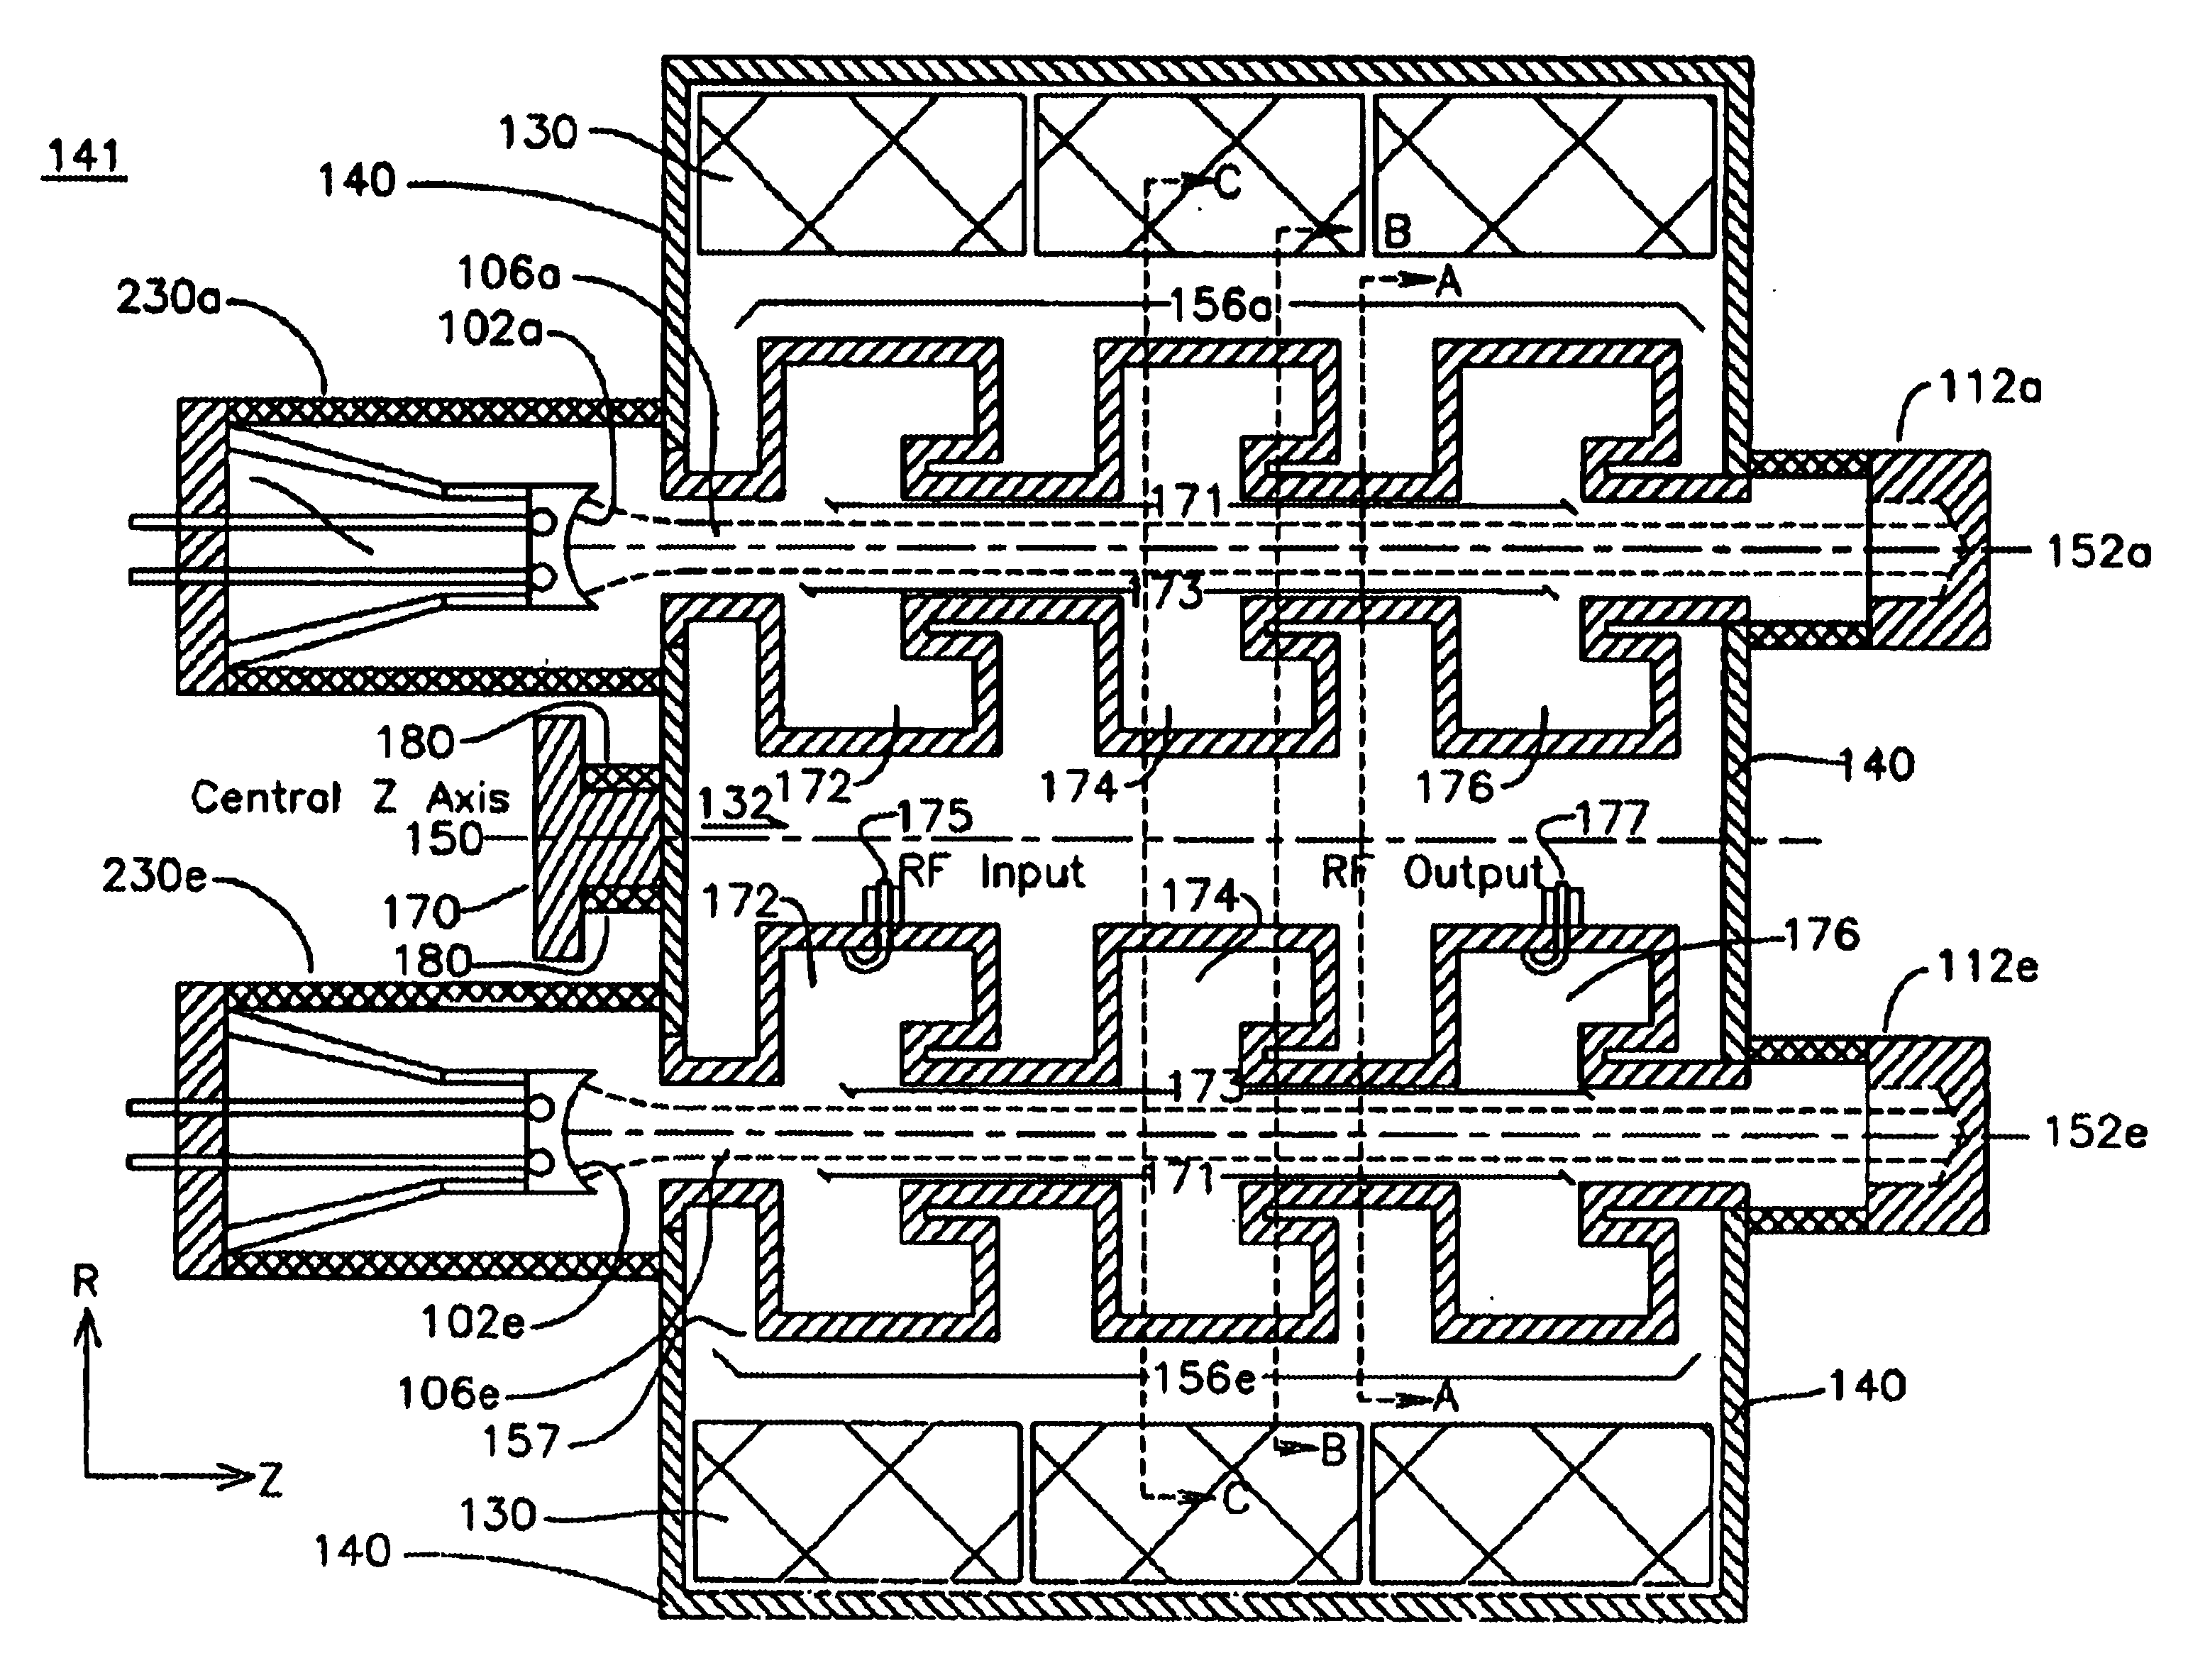 Electron gun for a multiple beam klystron using magnetic focusing with a magnetic field corrector